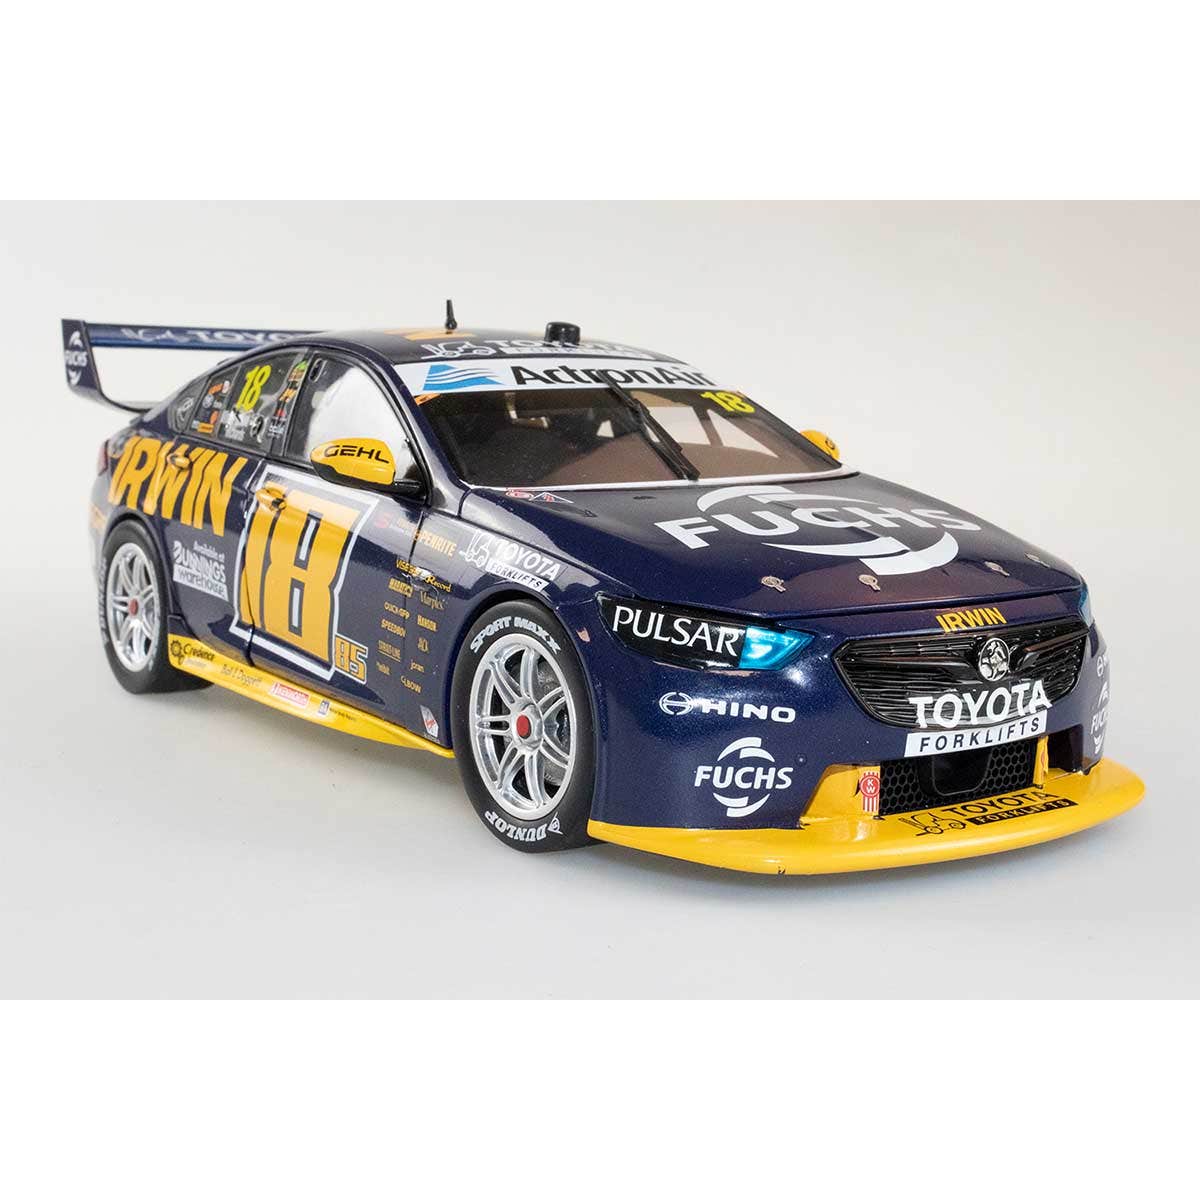 Holden ZB Commodore - #18 Drivers: Winterbottom/Richards - 1:43 Model Car